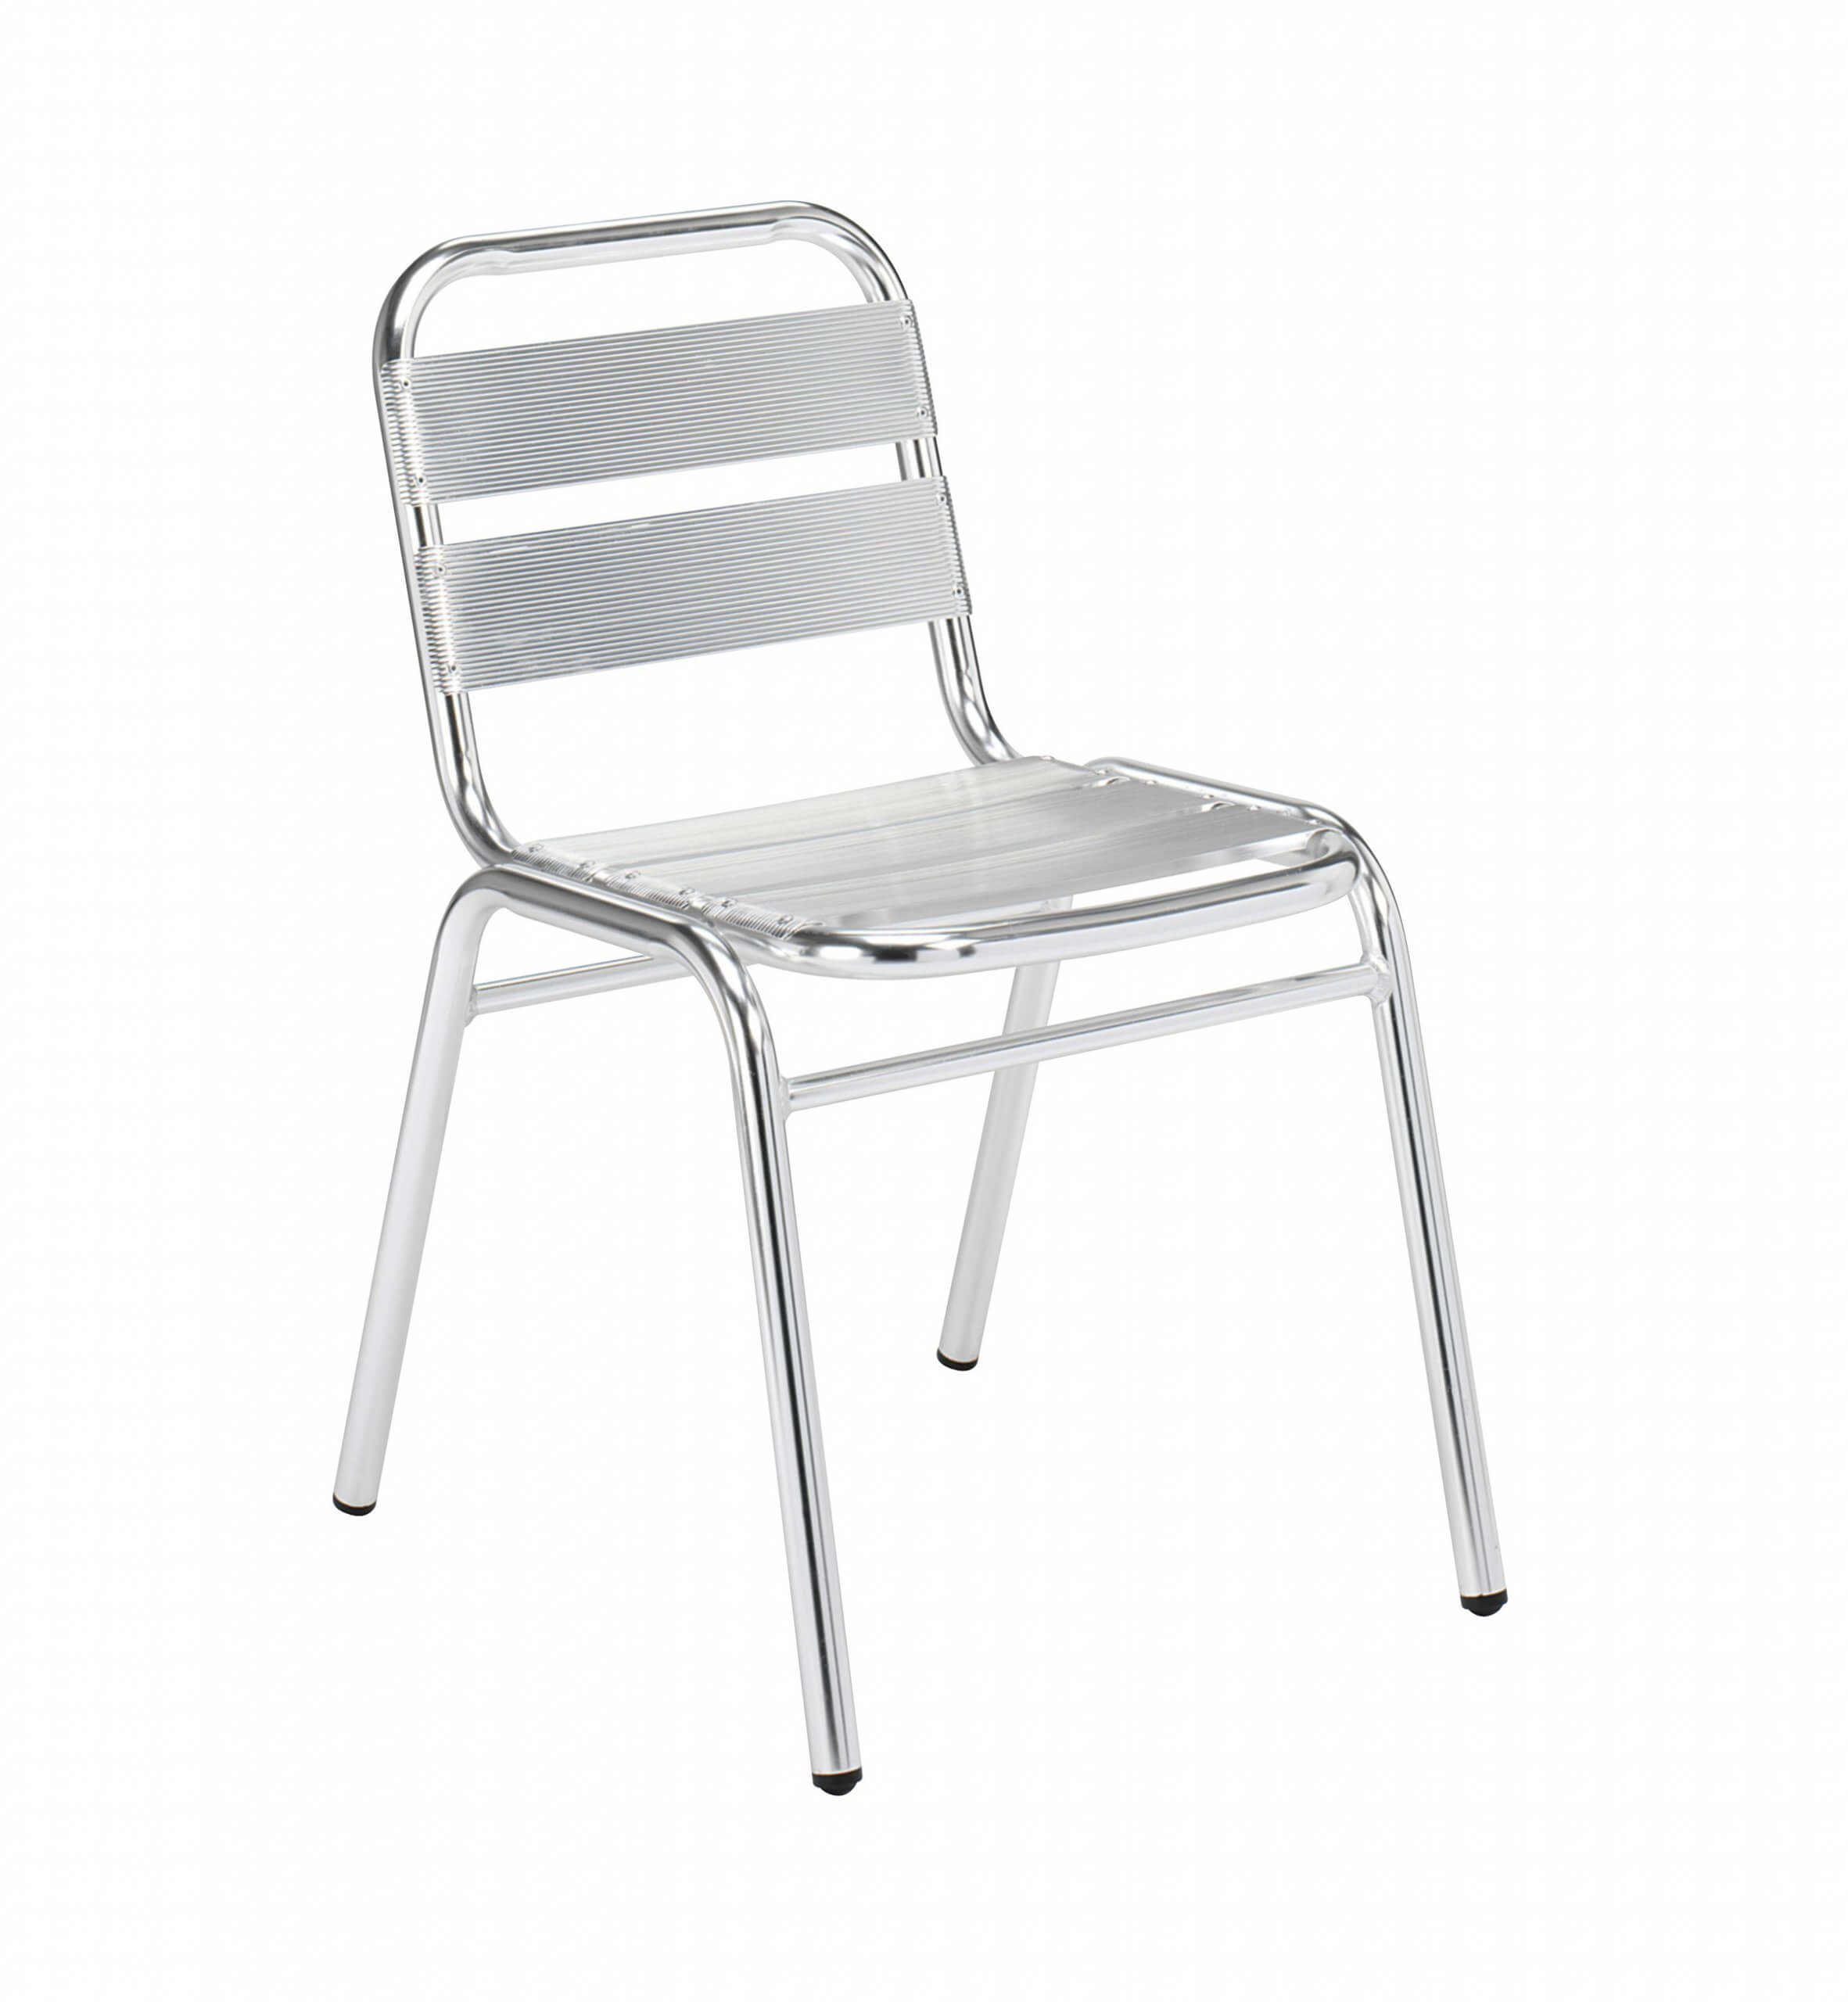 Aluminium Outdoor Chair without Arms